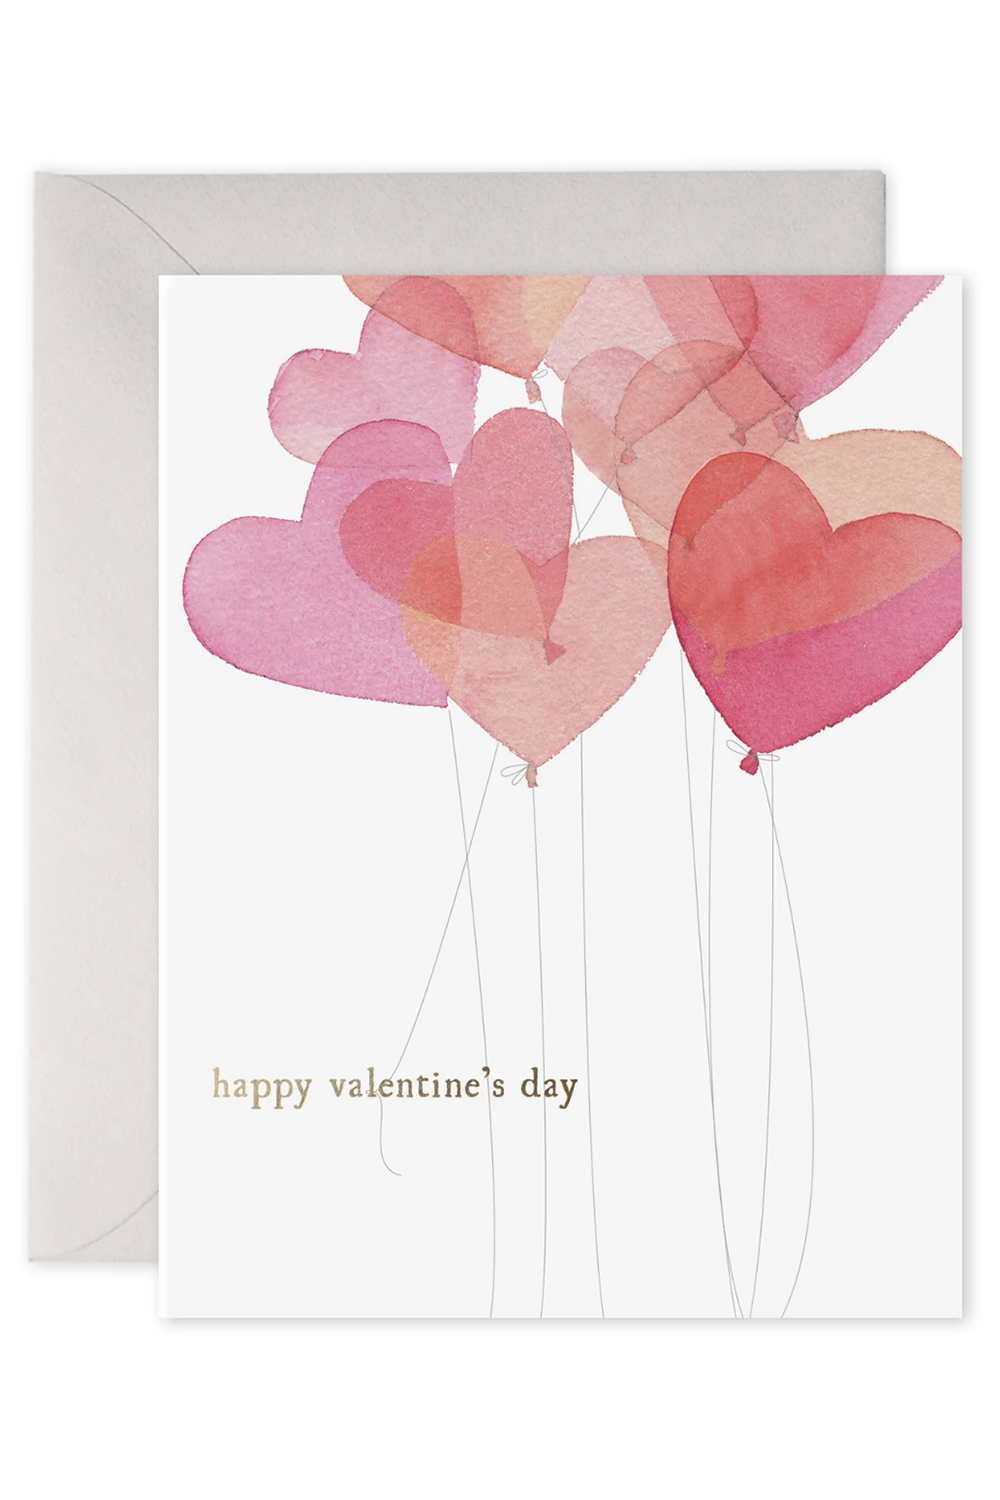 EFran Valentine's Day Greeting Card - Balloons